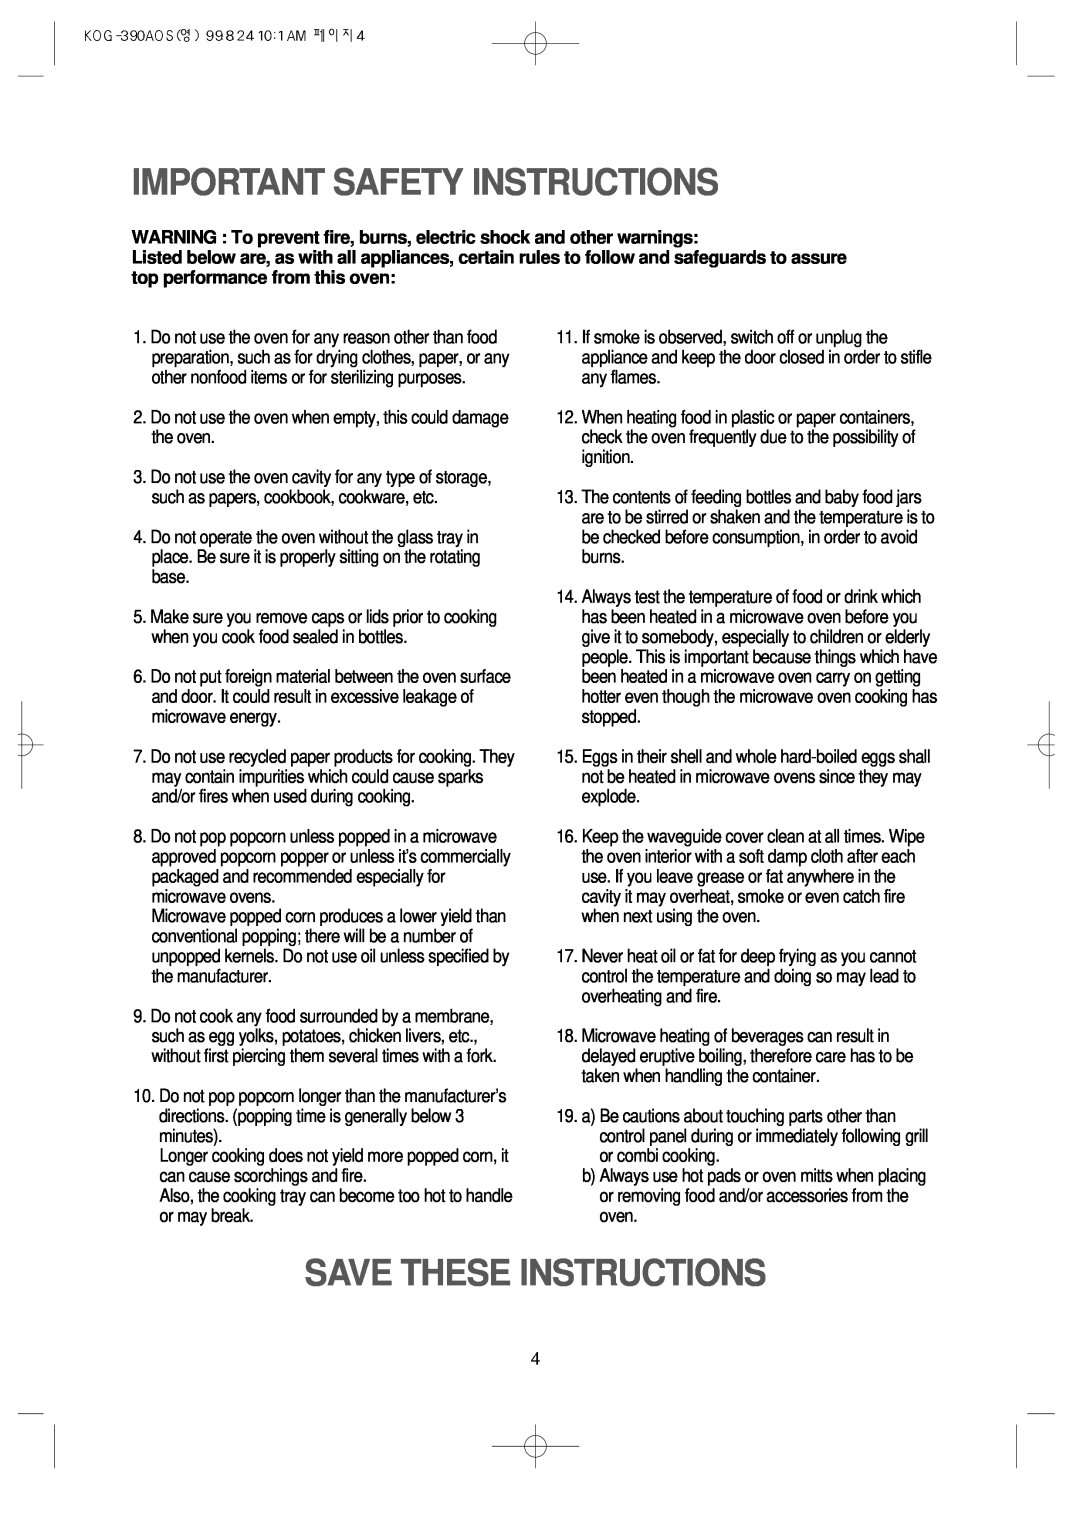 Daewoo KOG-390A manual Important Safety Instructions, Save These Instructions 